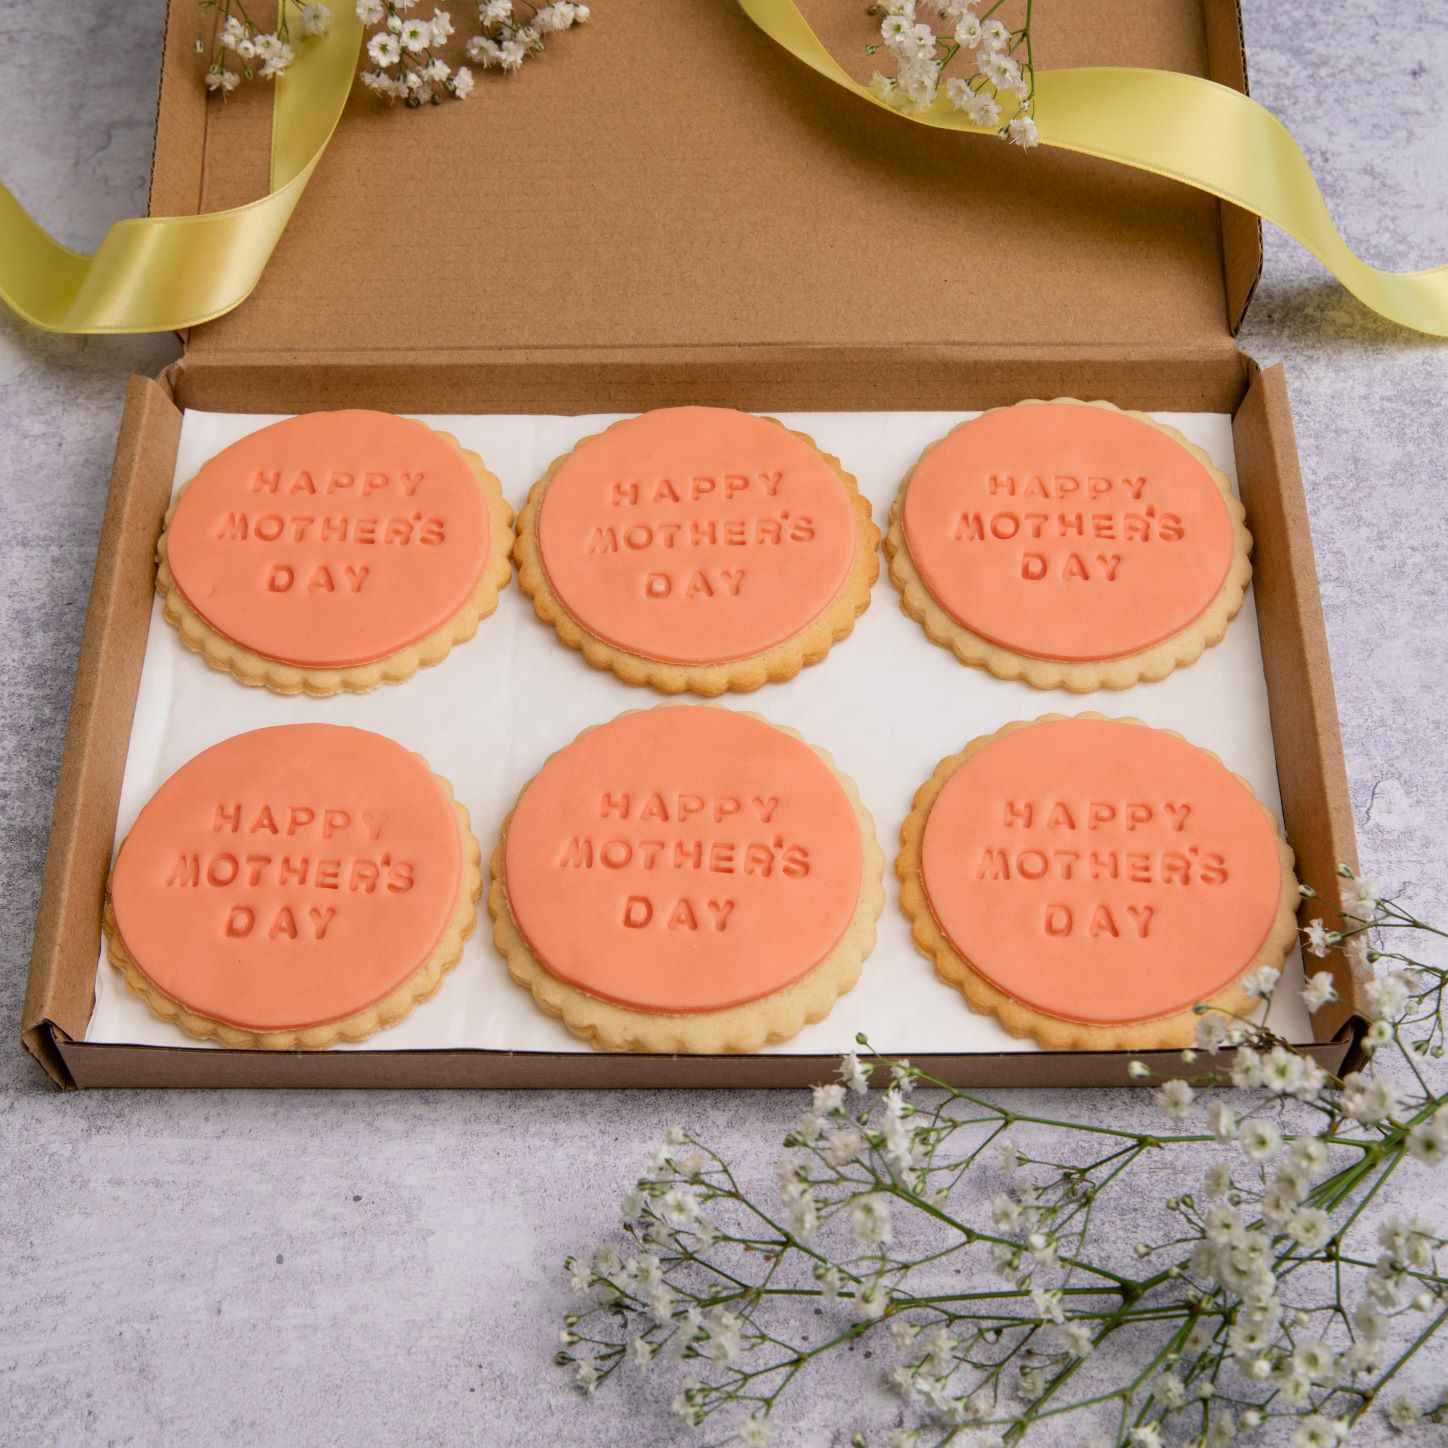 Happy Mother's Day biscuits in letterbox friendly packaging by Bloom Bakers